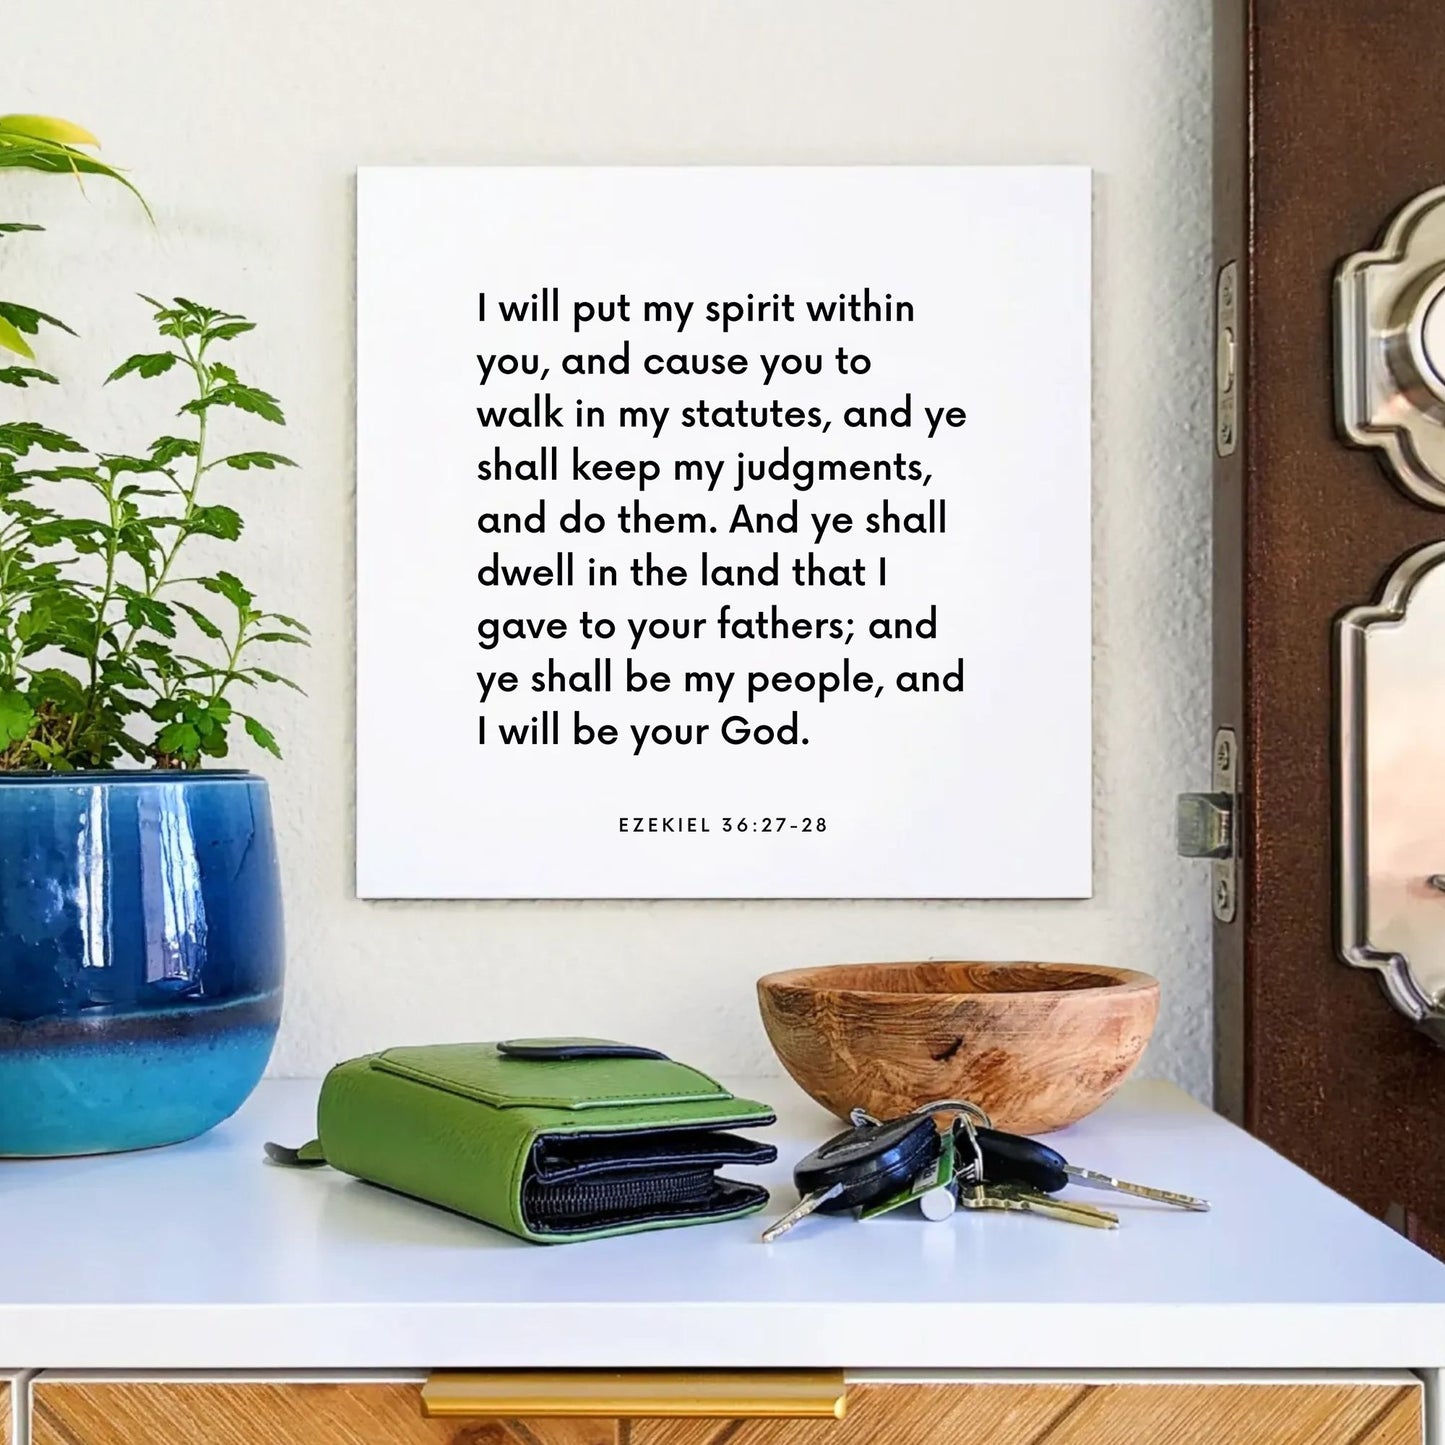 Entryway mouting of the scripture tile for Ezekiel 36:27-28 - "I will put my spirit within you"